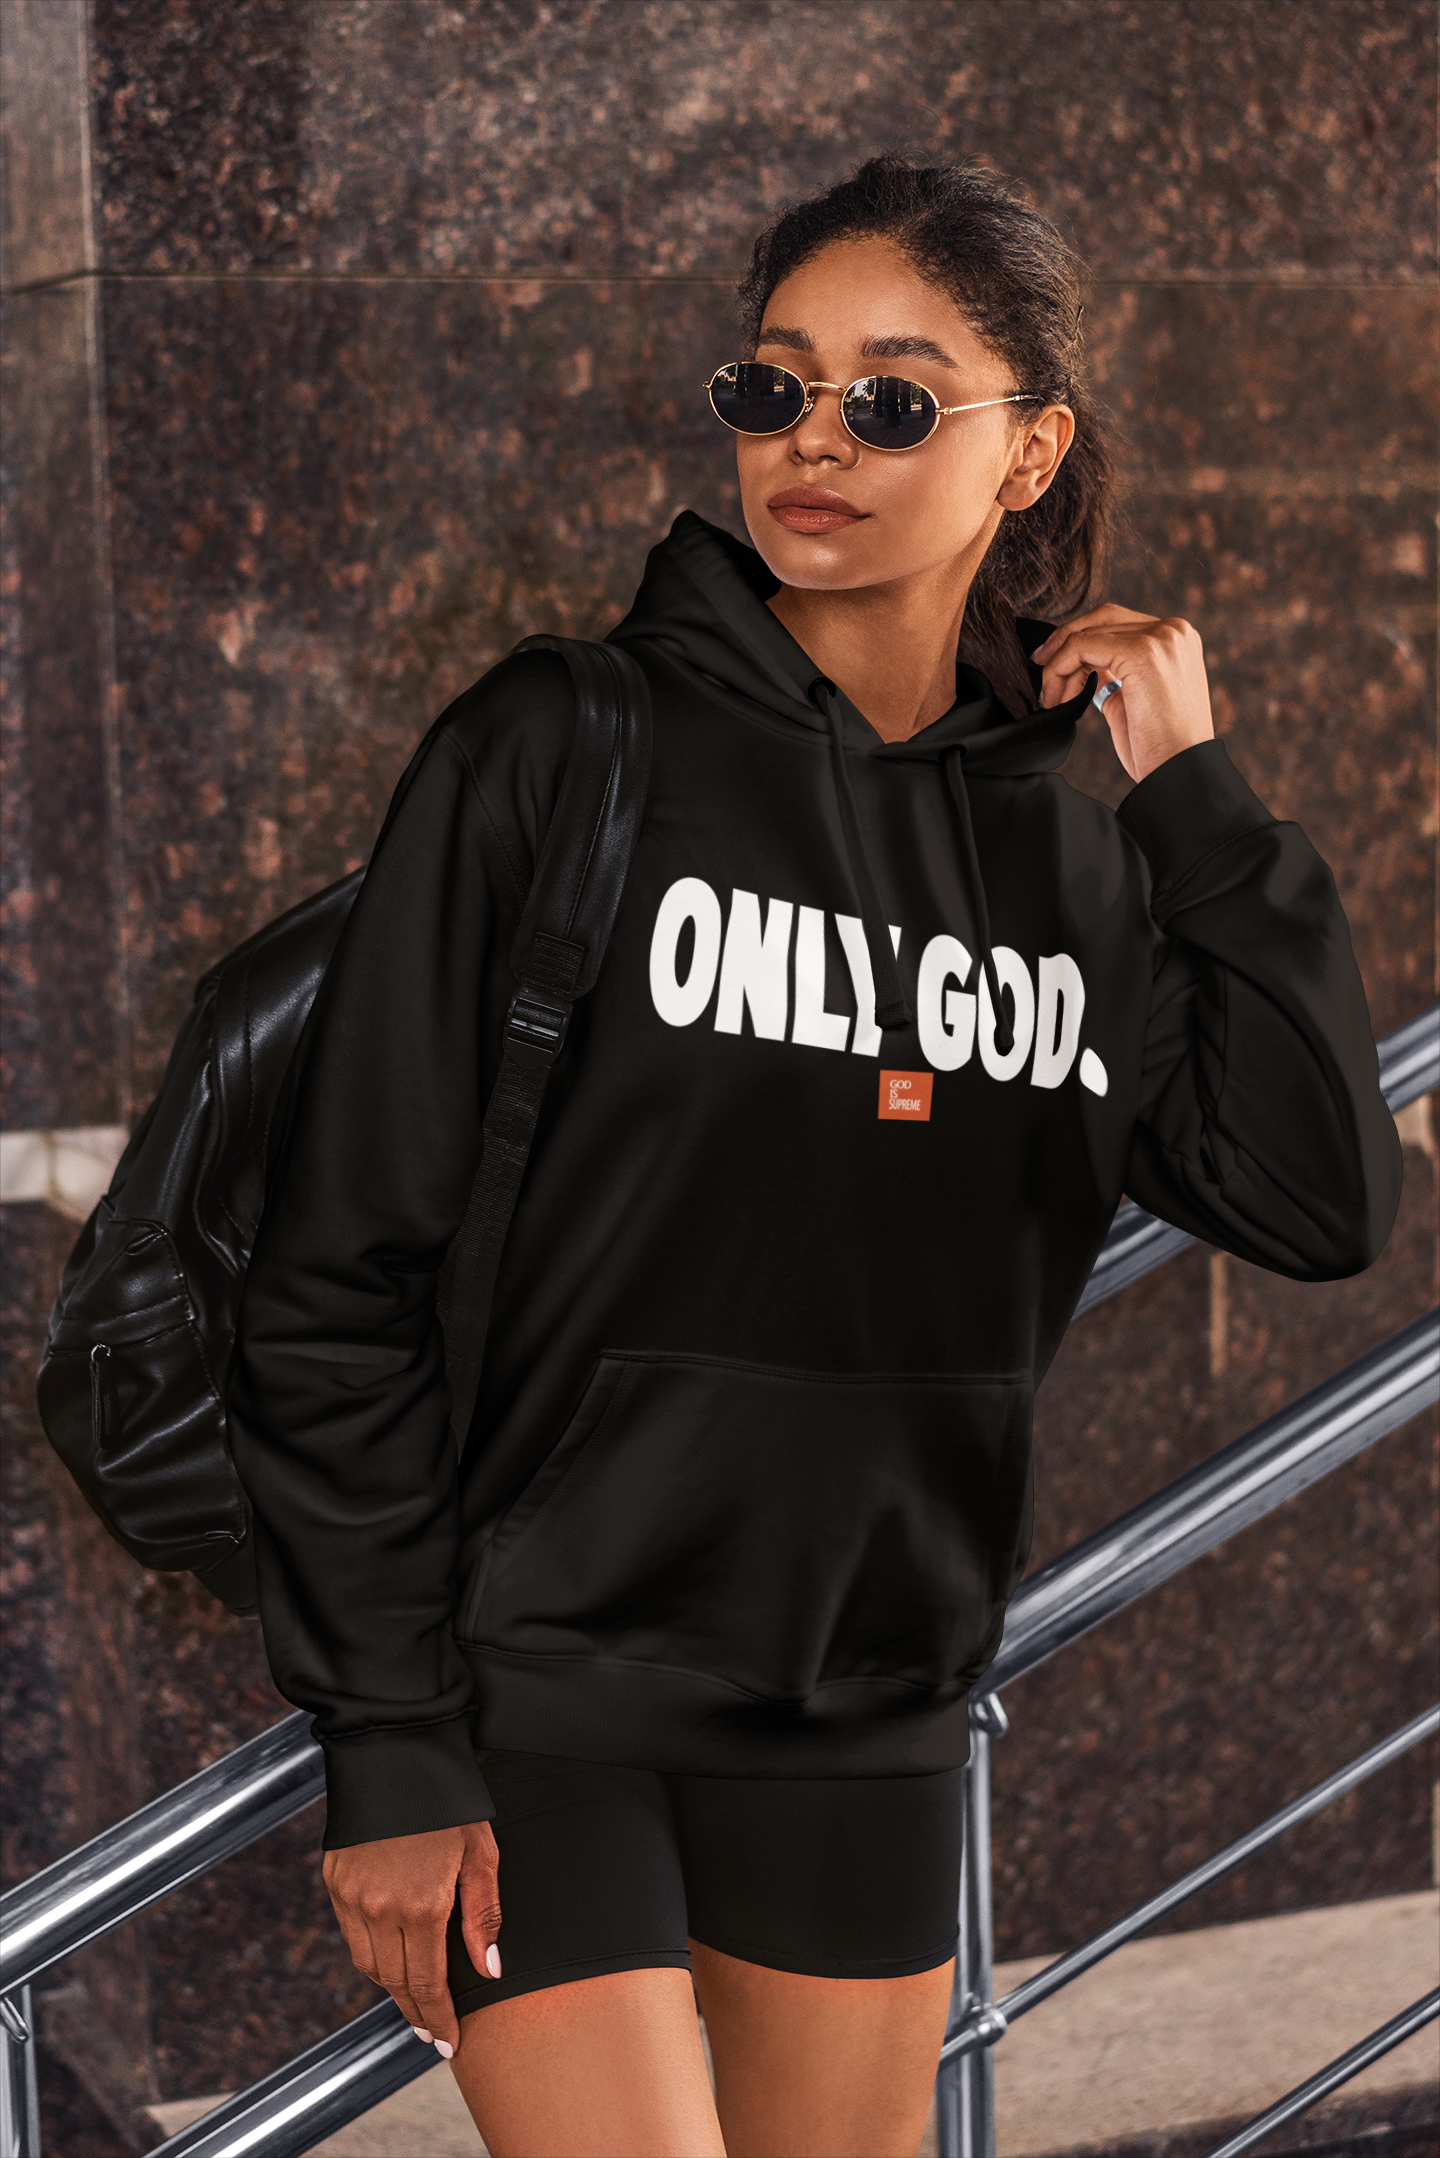 Only God with Box Logo Black Hoodie